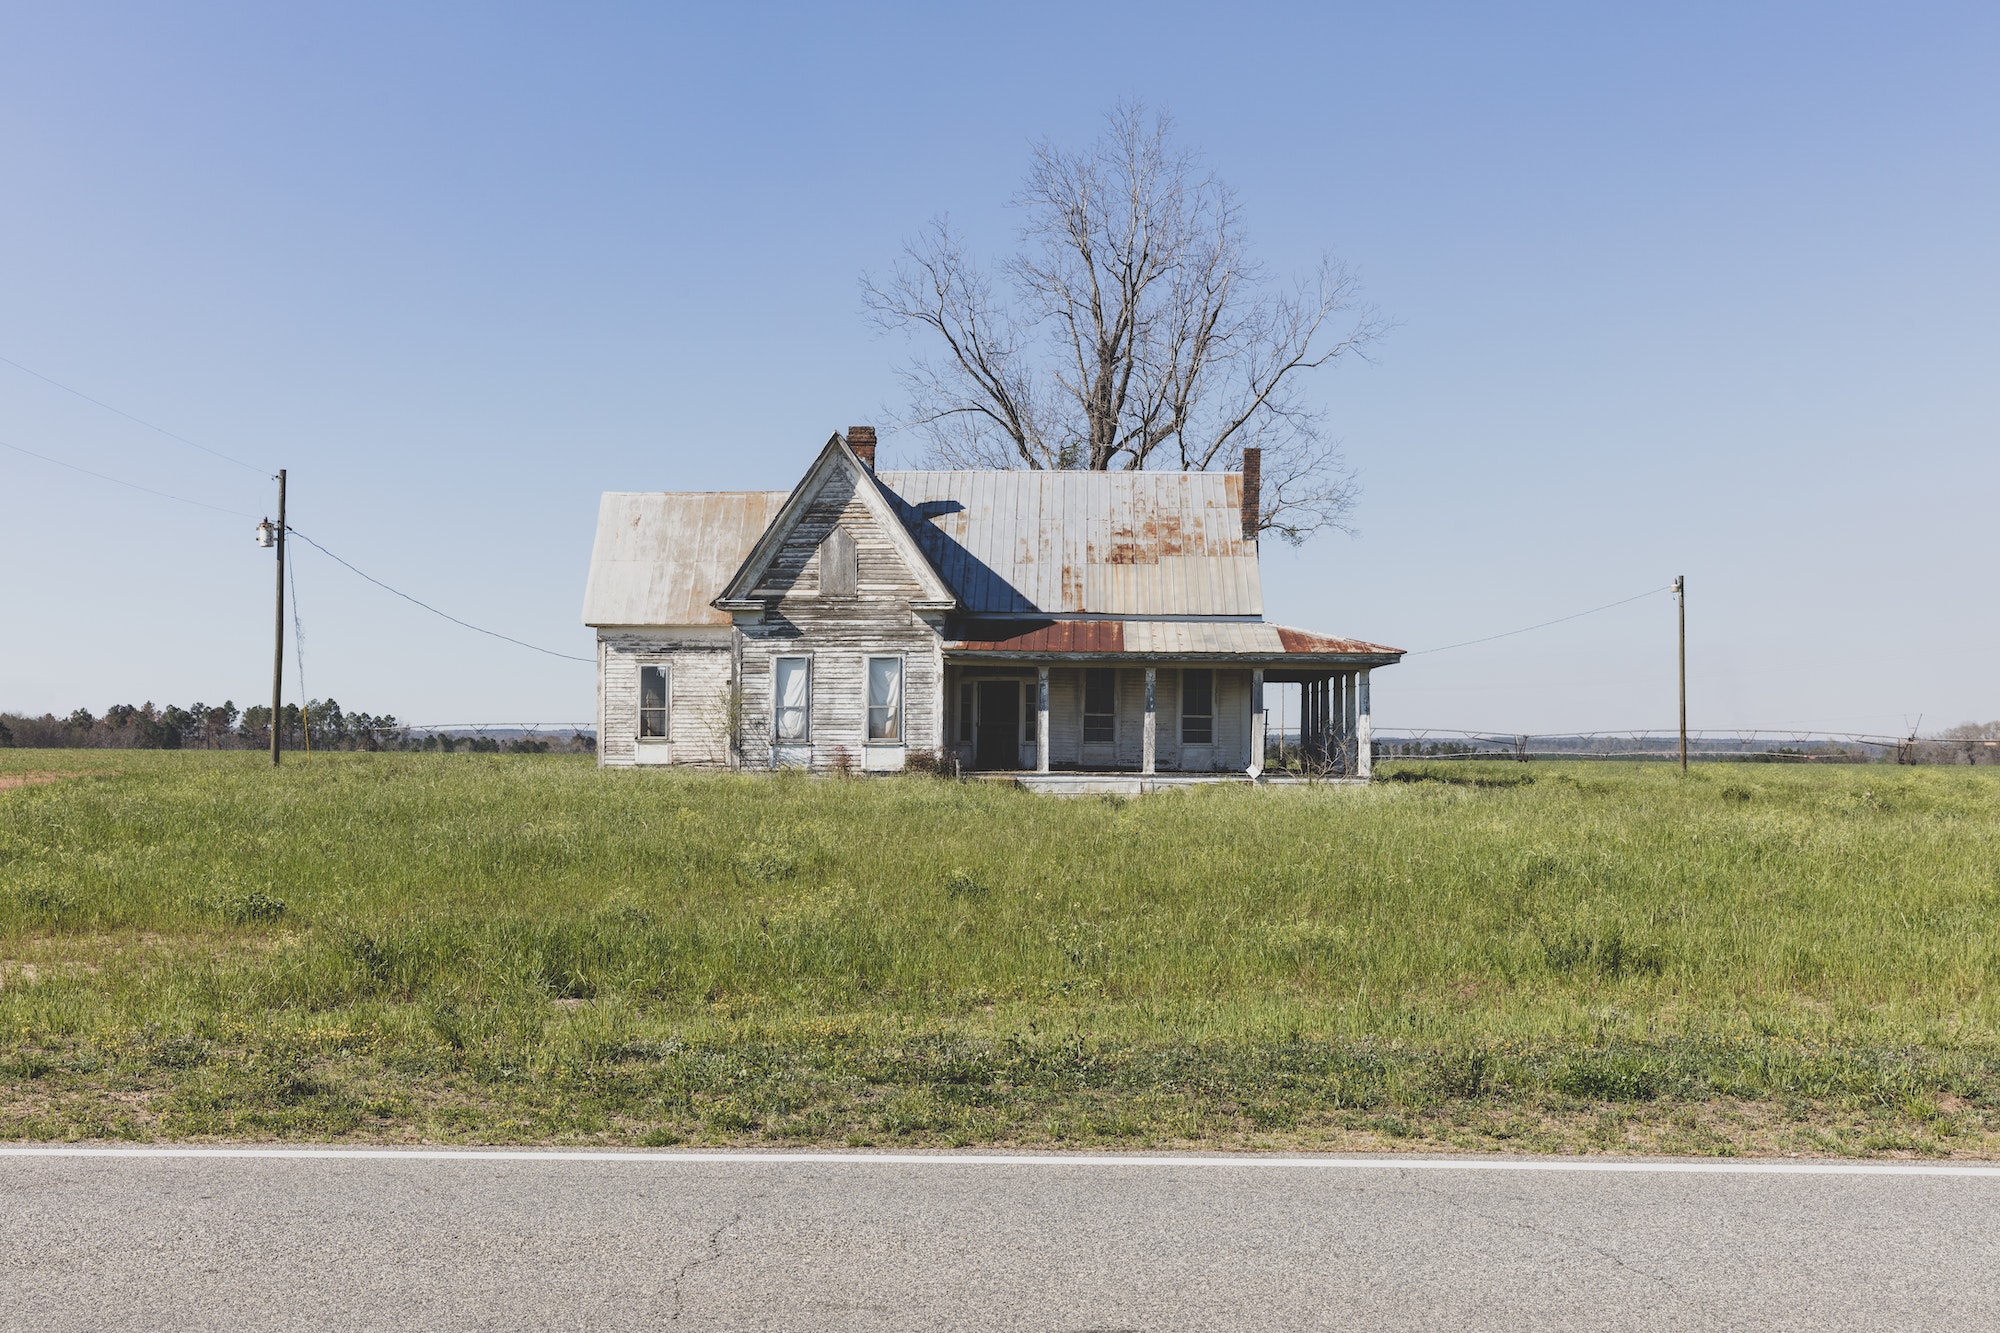 10 Easy Steps on How to Buy an Abandoned House in the US